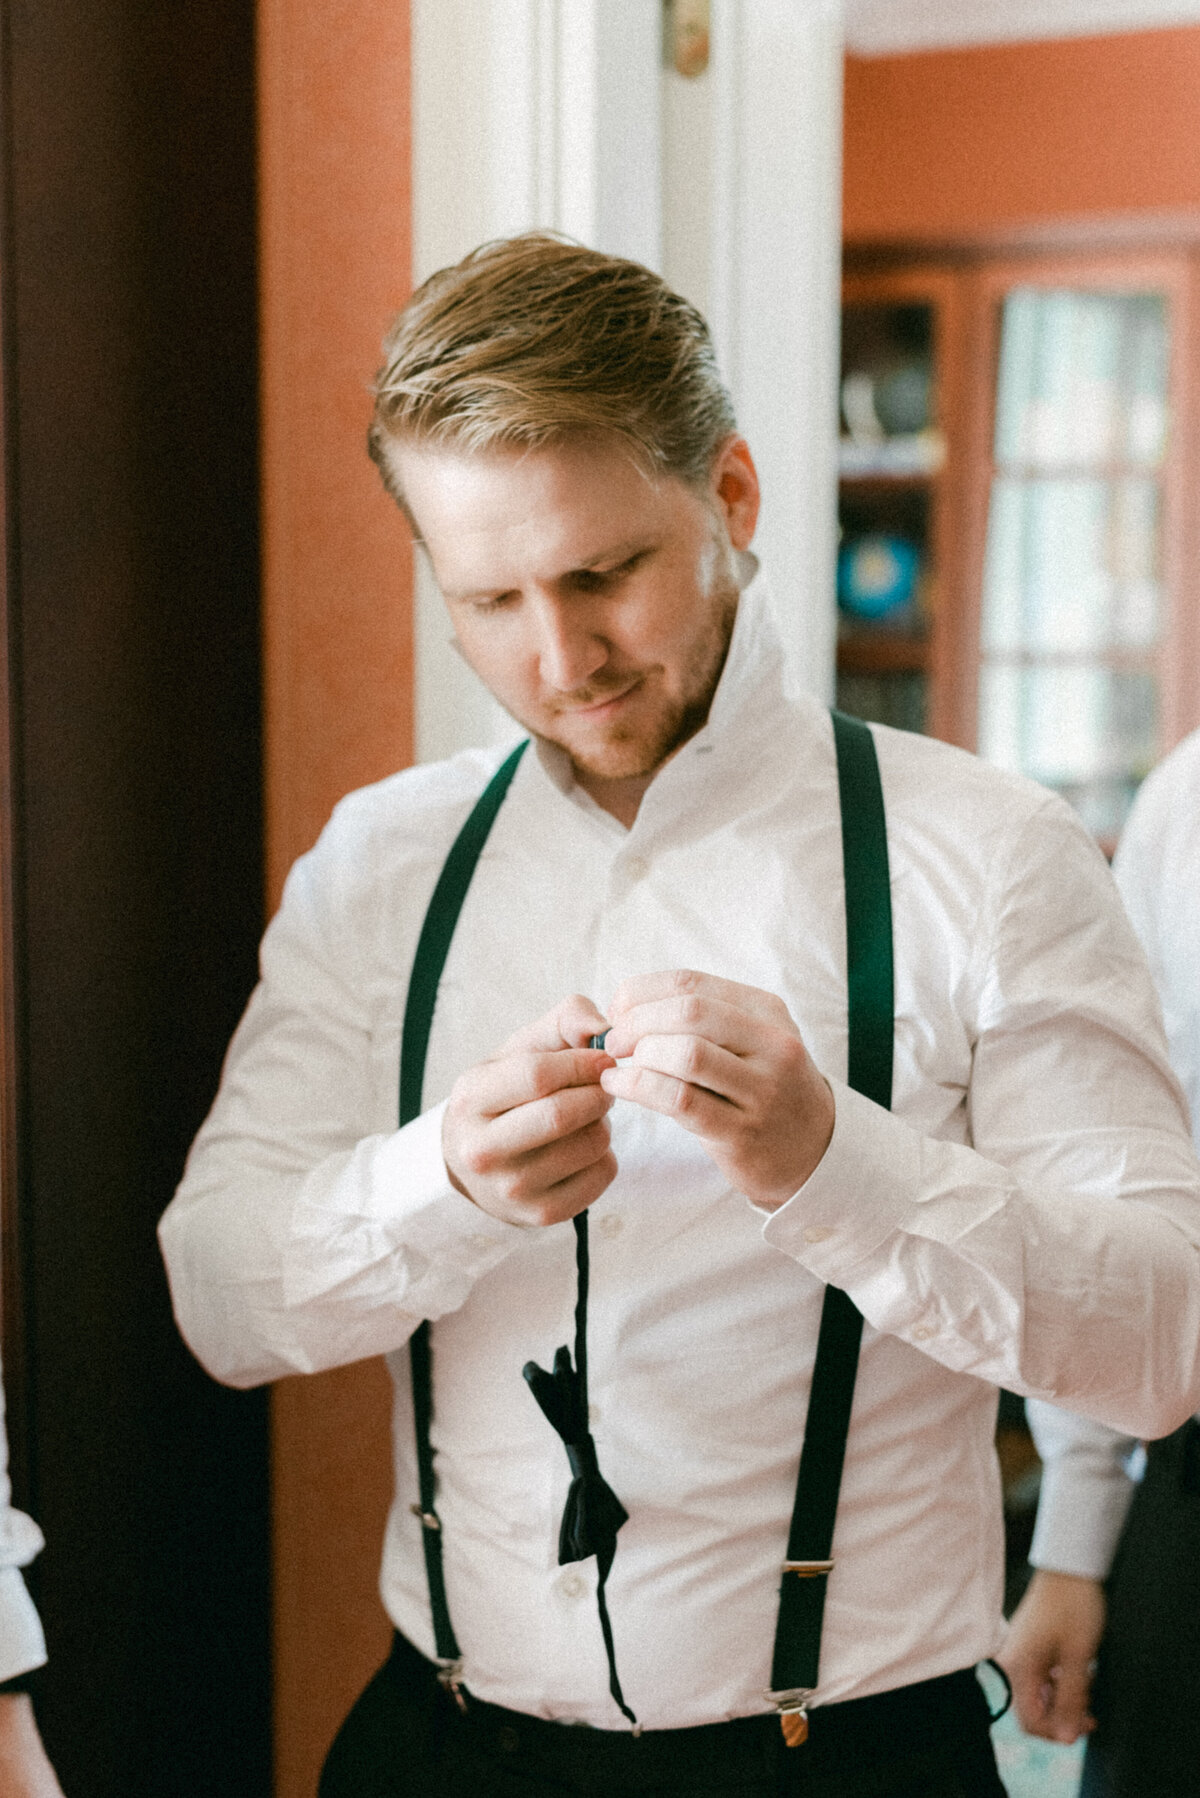 The groom is adjusting his bowtie in an image captured by wedding photographer Hannika Gabrielsson.